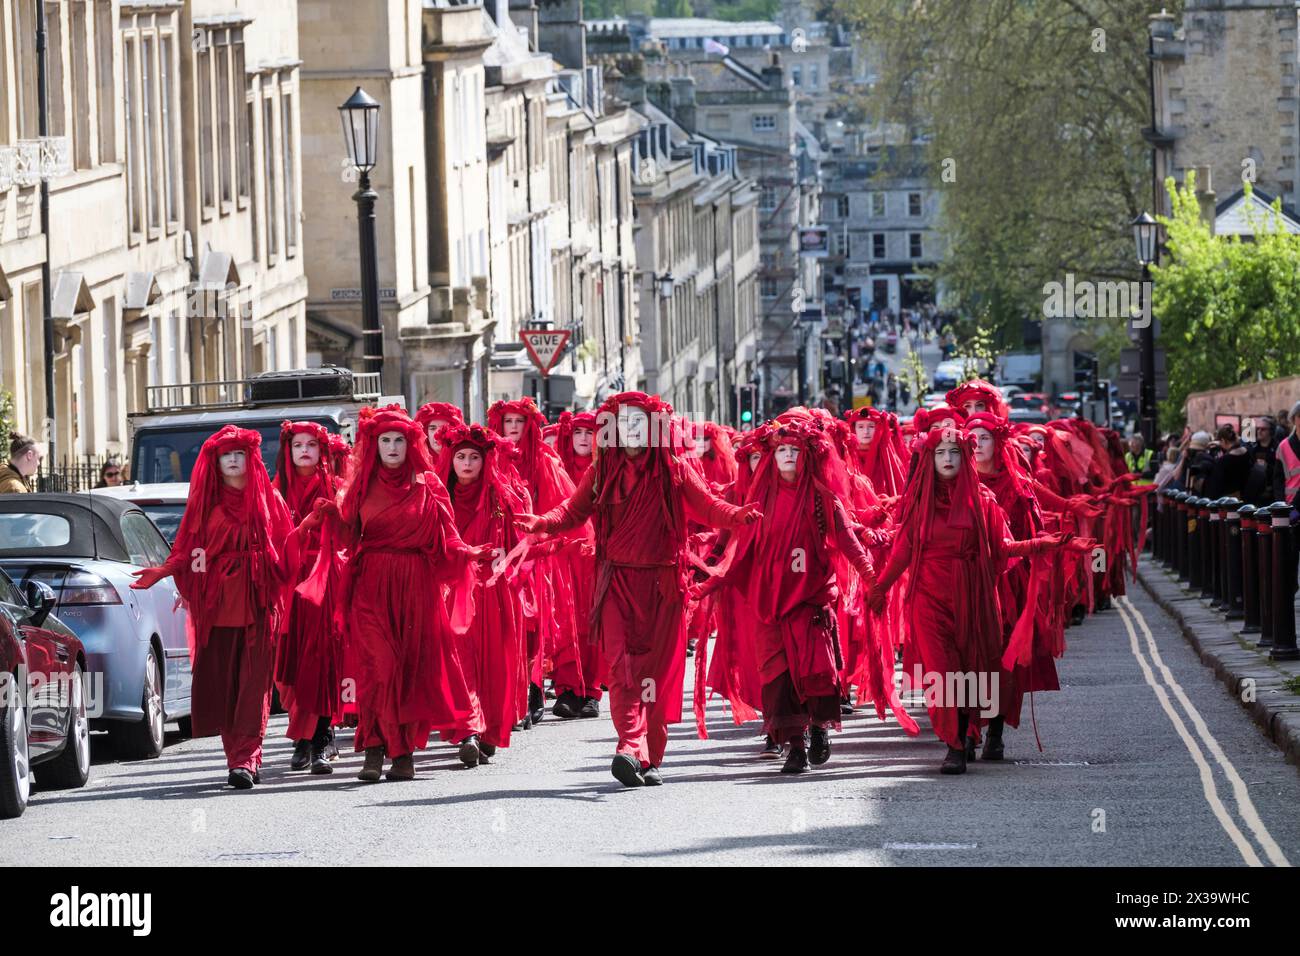 Extinction Rebellion hold a Funeral for Nature procession in the centre of Bath today. The Reb Rebels accompanied by drummers playing a funeral beat m Stock Photo